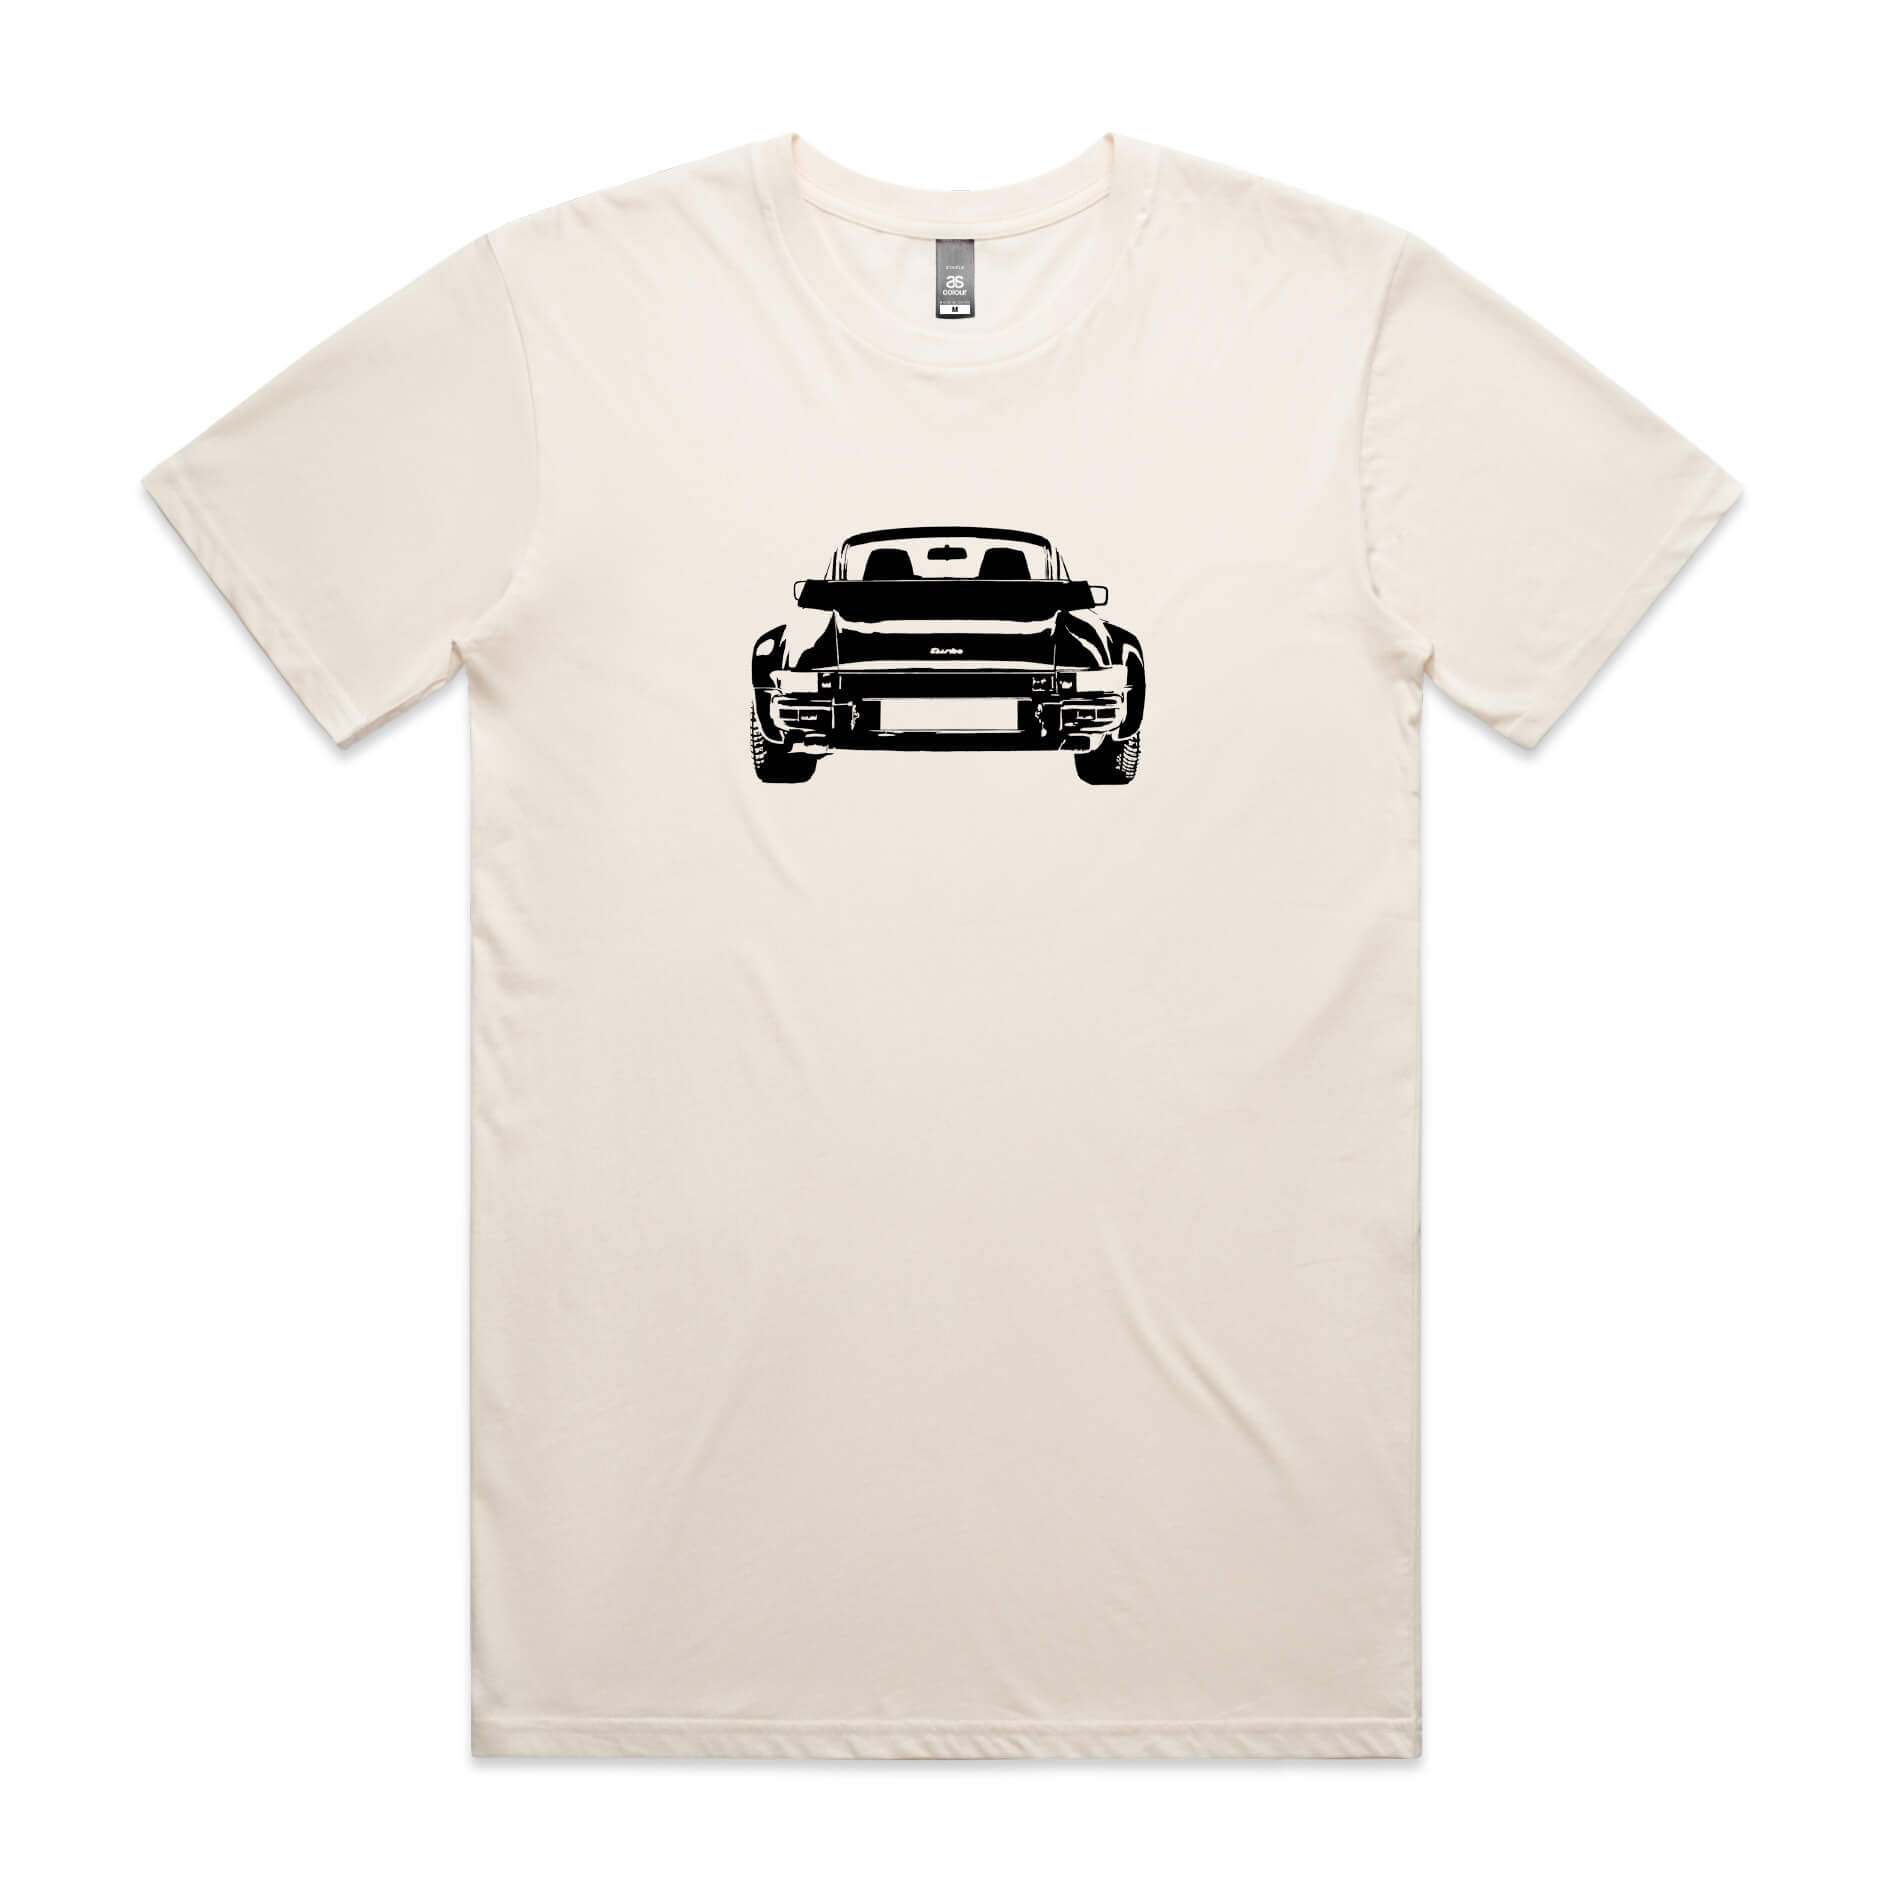 Porsche 911 turbo t-shirt in beige with a black car graphic